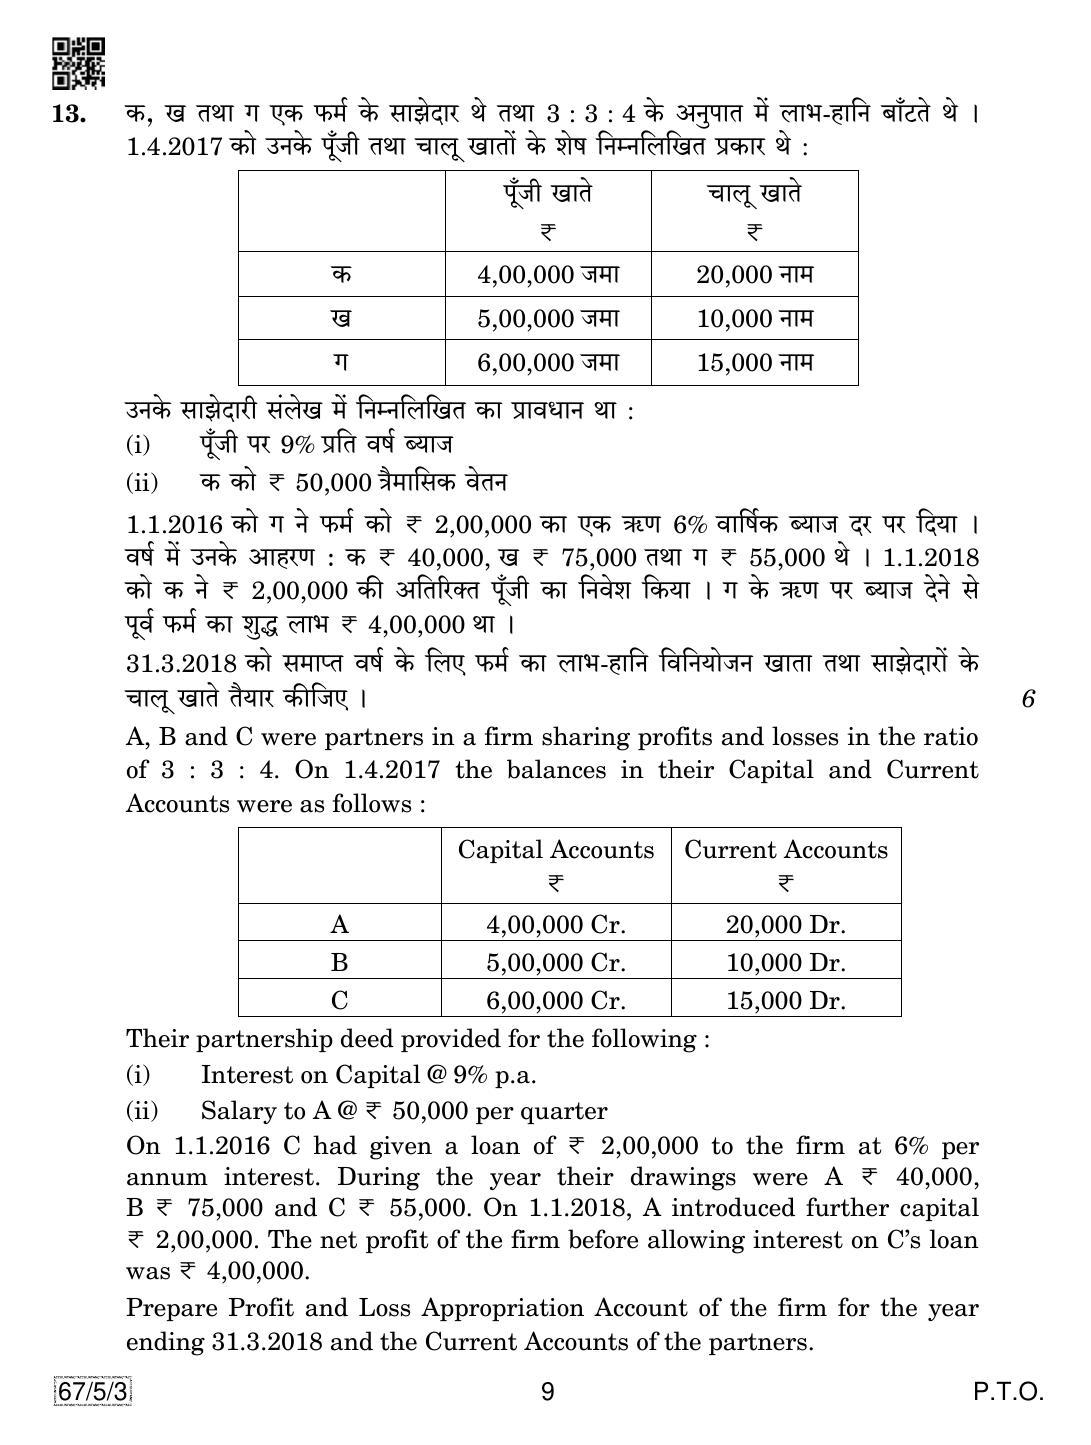 CBSE Class 12 67-5-3 Accountancy 2019 Question Paper - Page 9